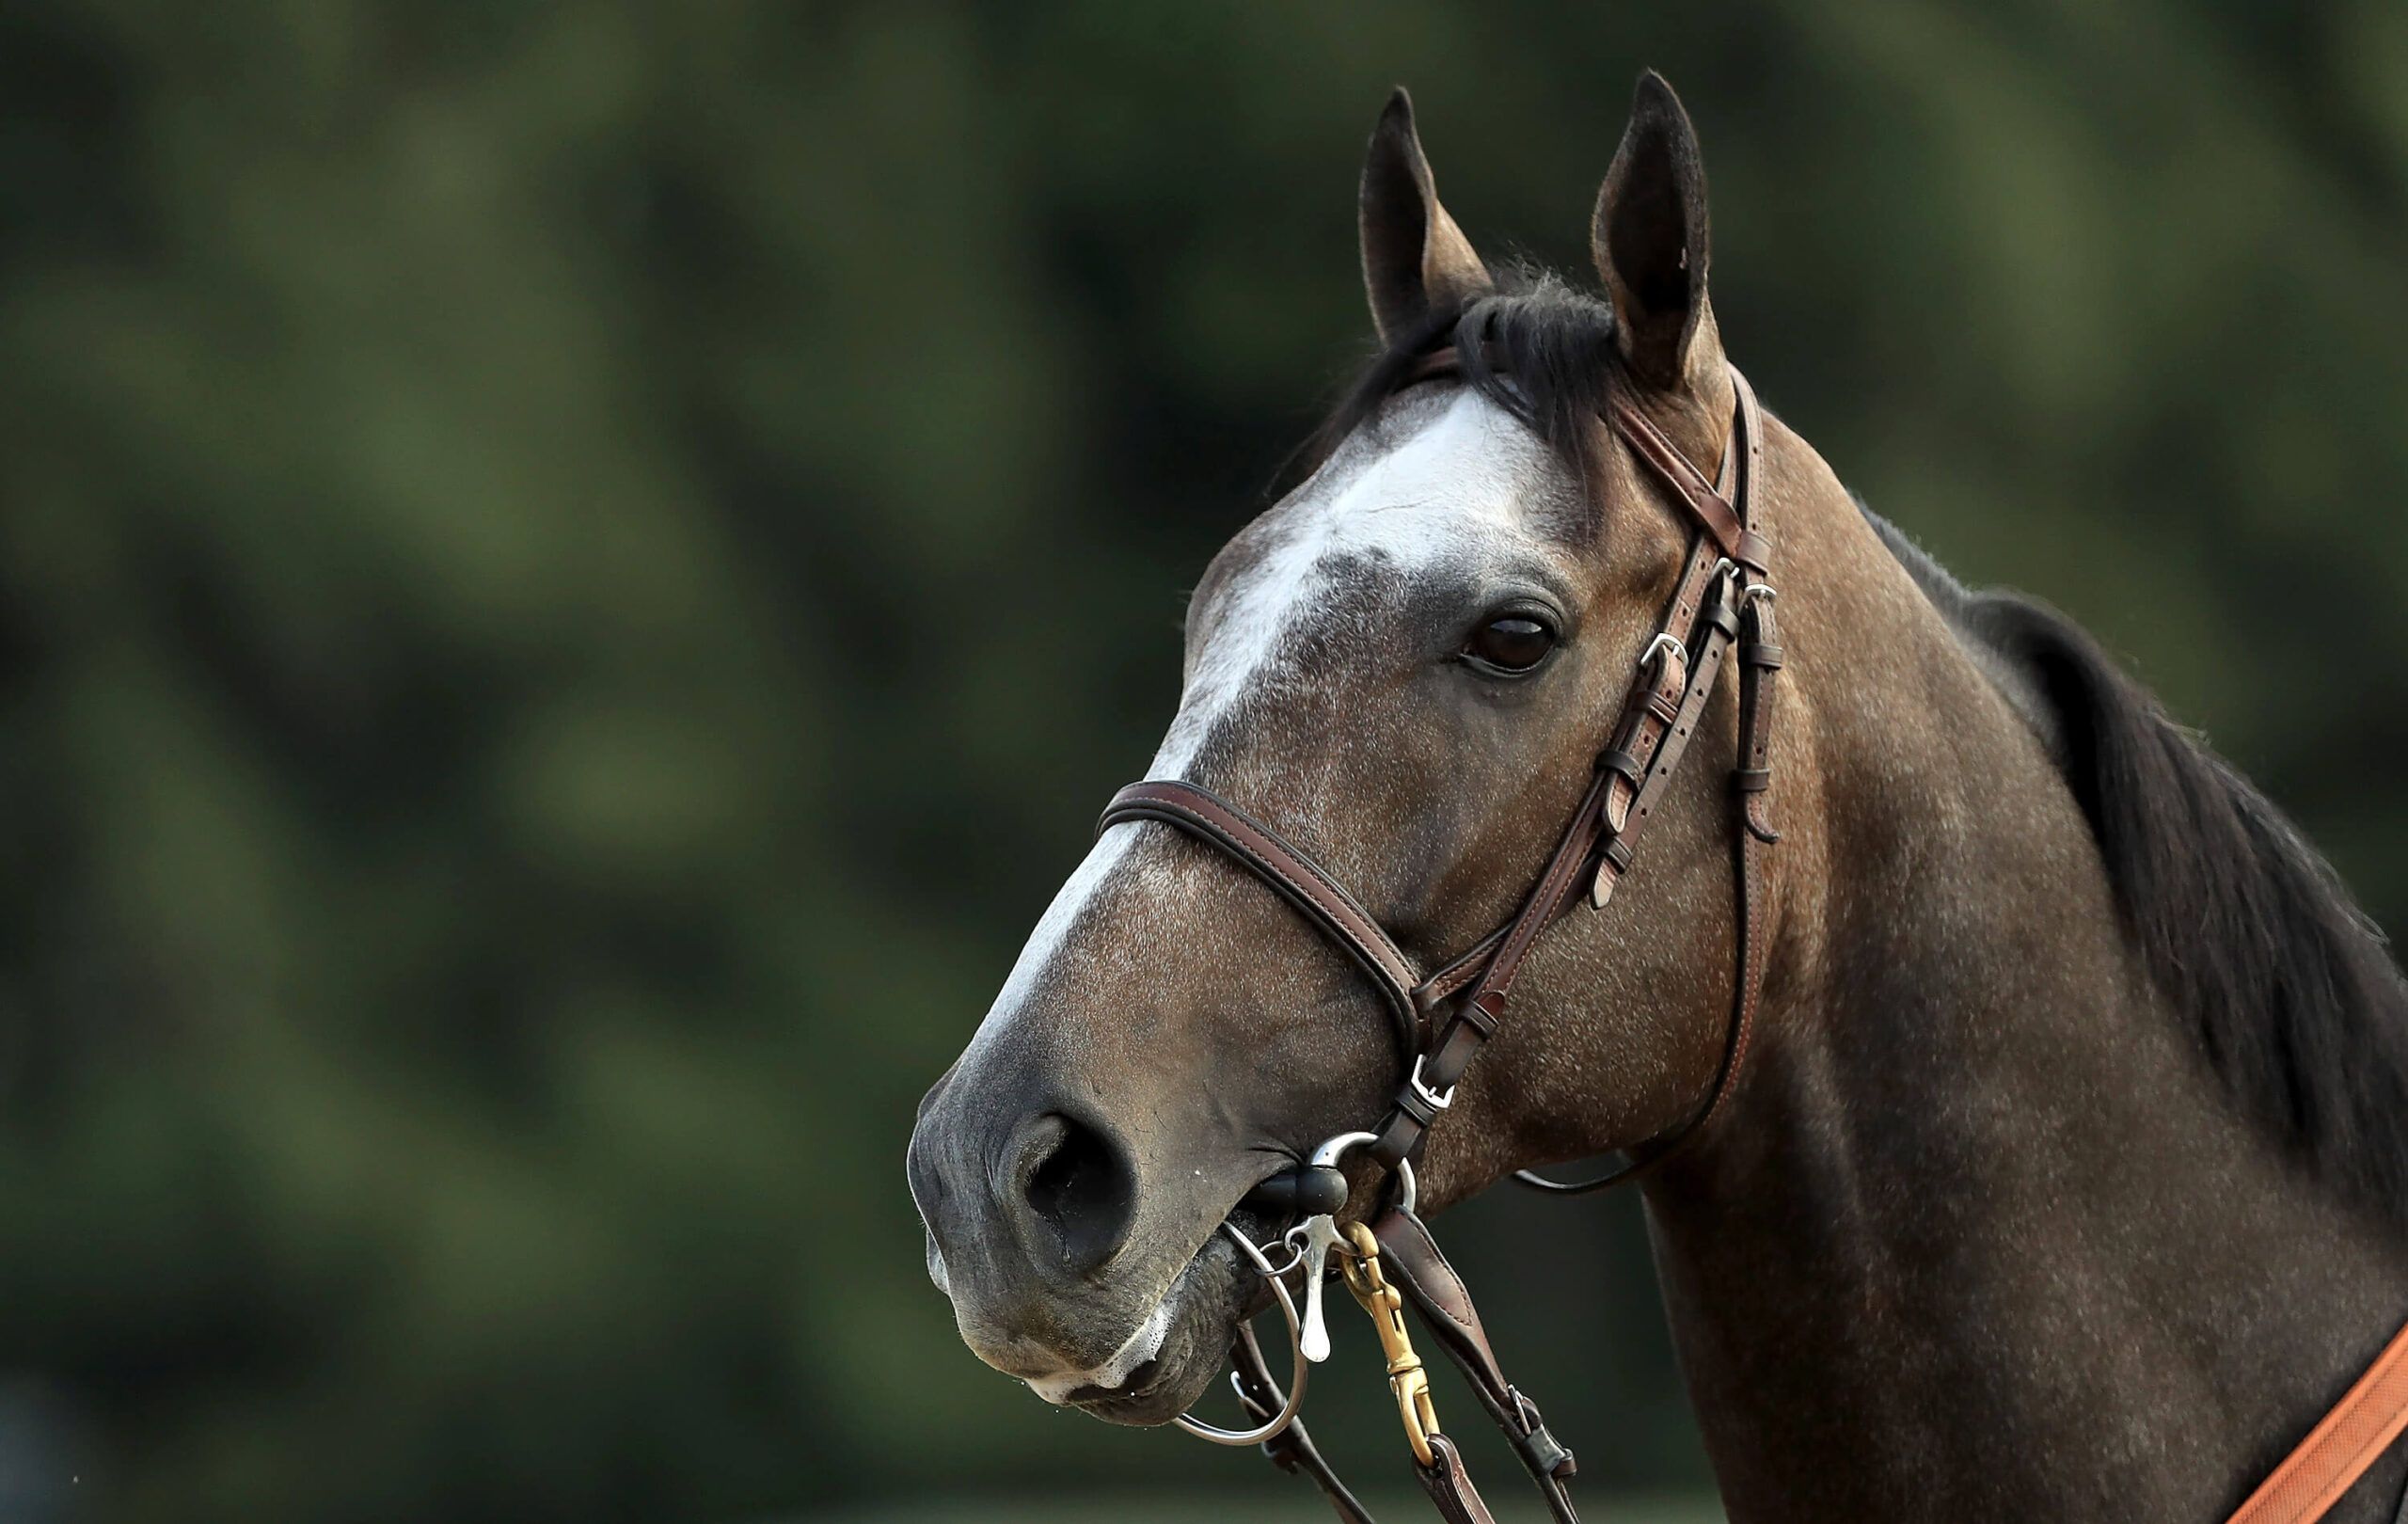 Arrogate has passed away aged seven with a mystery illness.